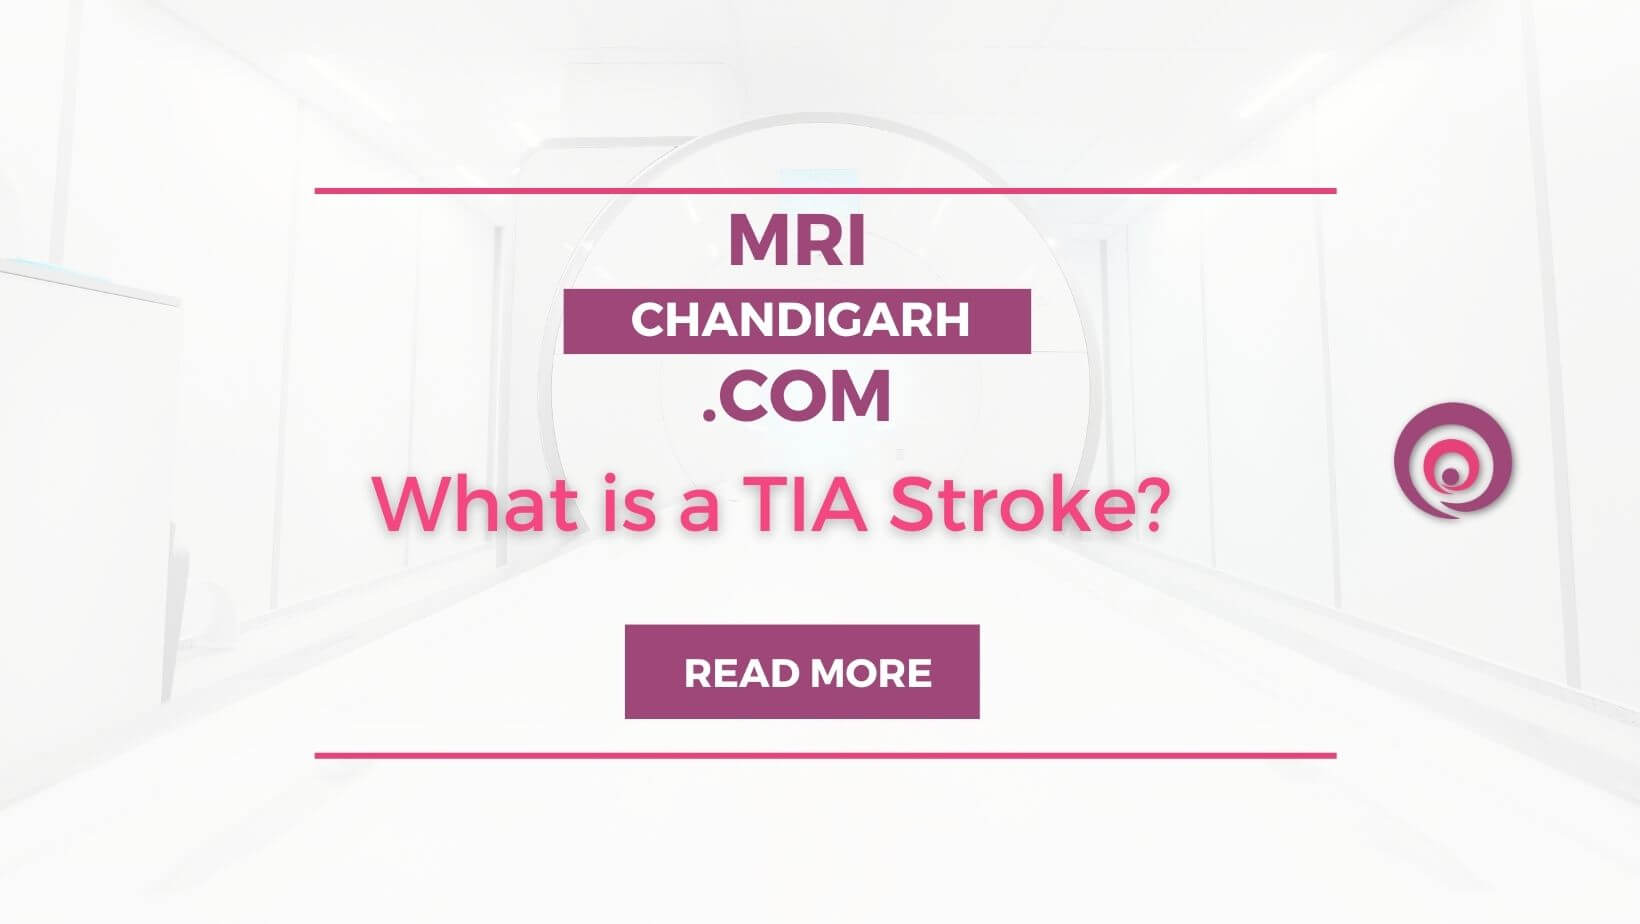 What is a TIA Stroke?